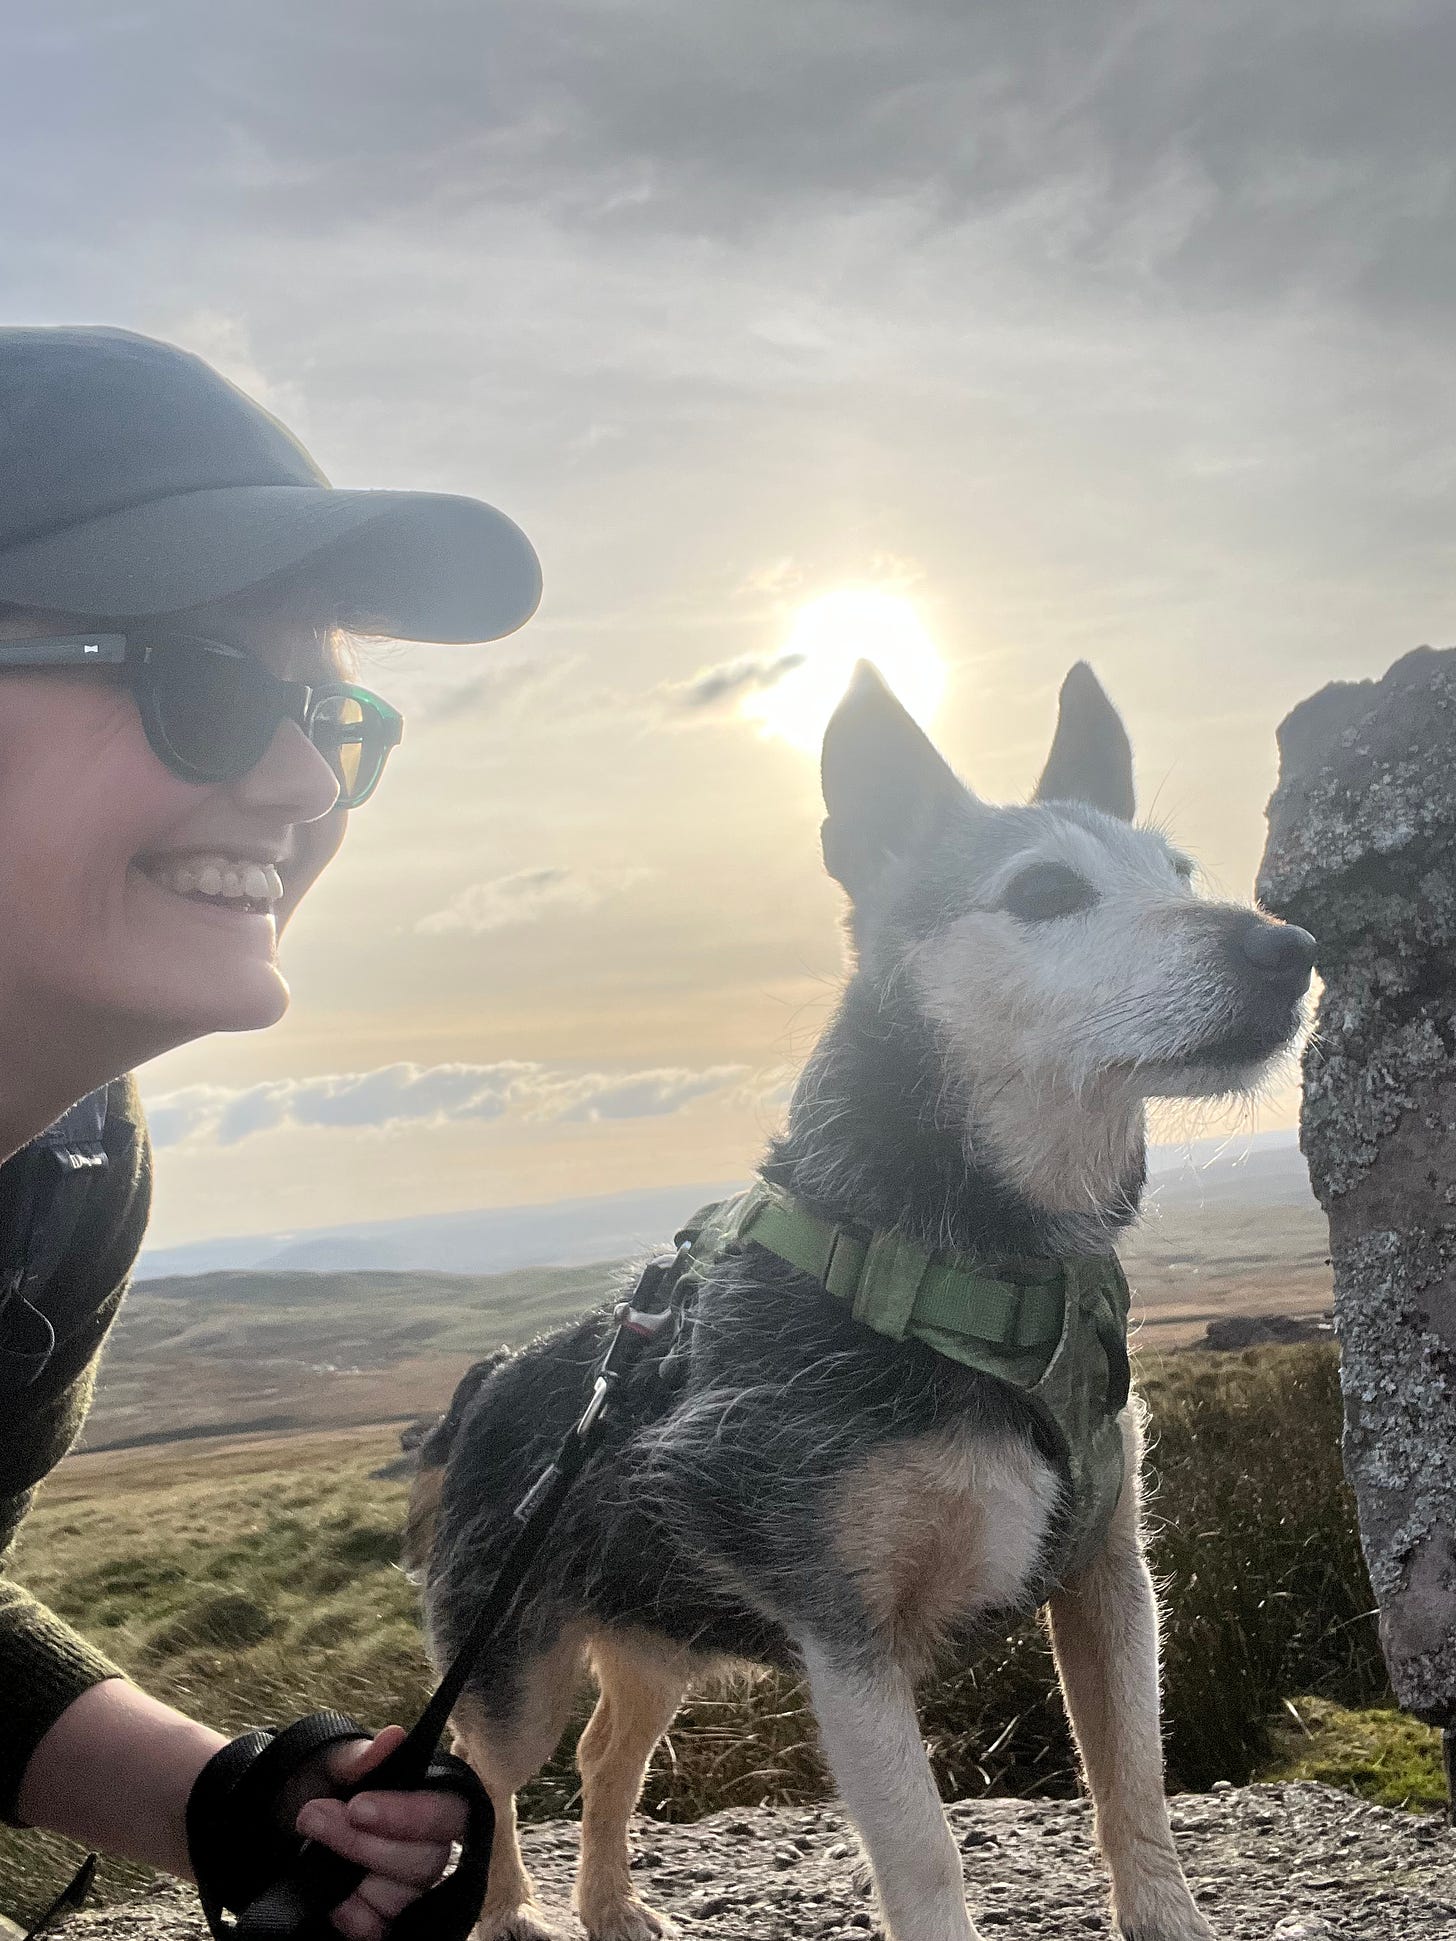 Katie the human and Jack the dog on top of a mountain, gazing into the distance with the sun behind them